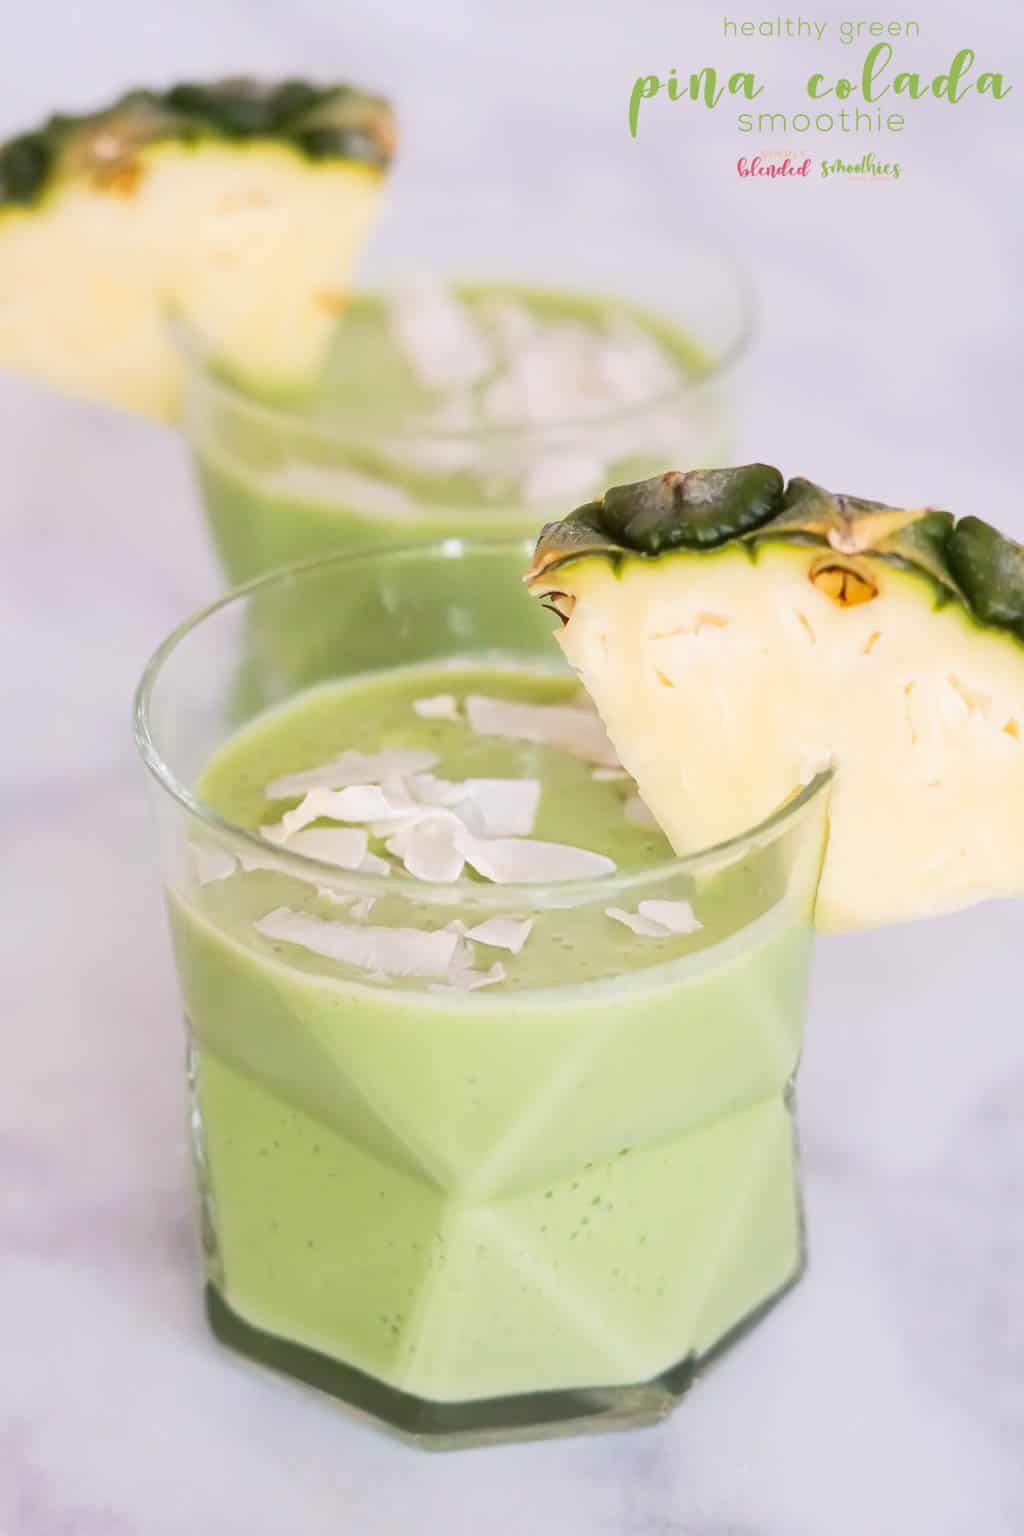 This Healthy Pina Collada Recipe Is A Healthy Alternative To A Pina Colada And Is Full Of Healthy Spinach Pineapple And Other Delicious Ingredients